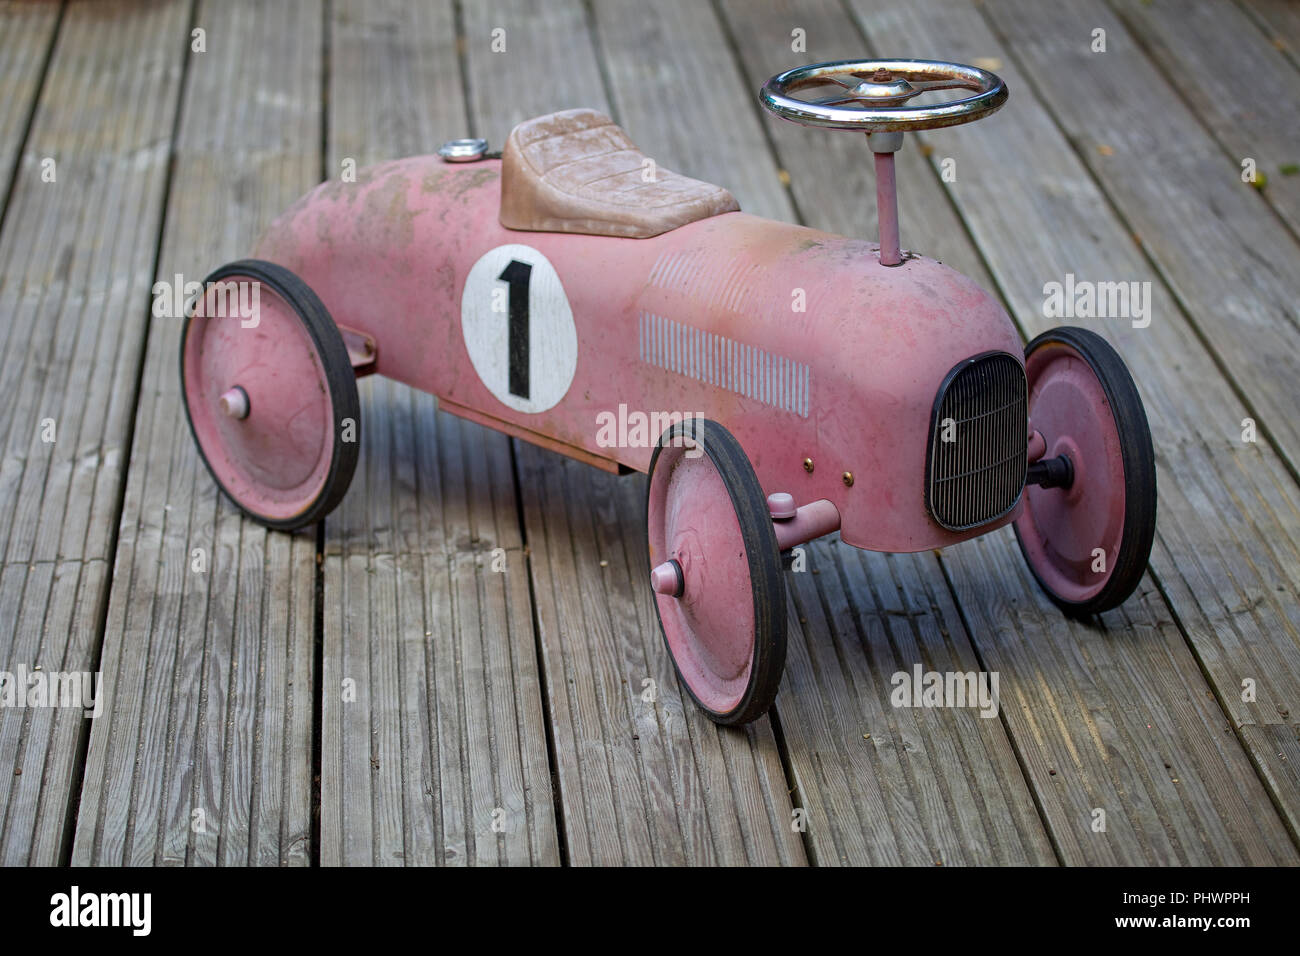 Childs old metal toy car on decking Stock Photo